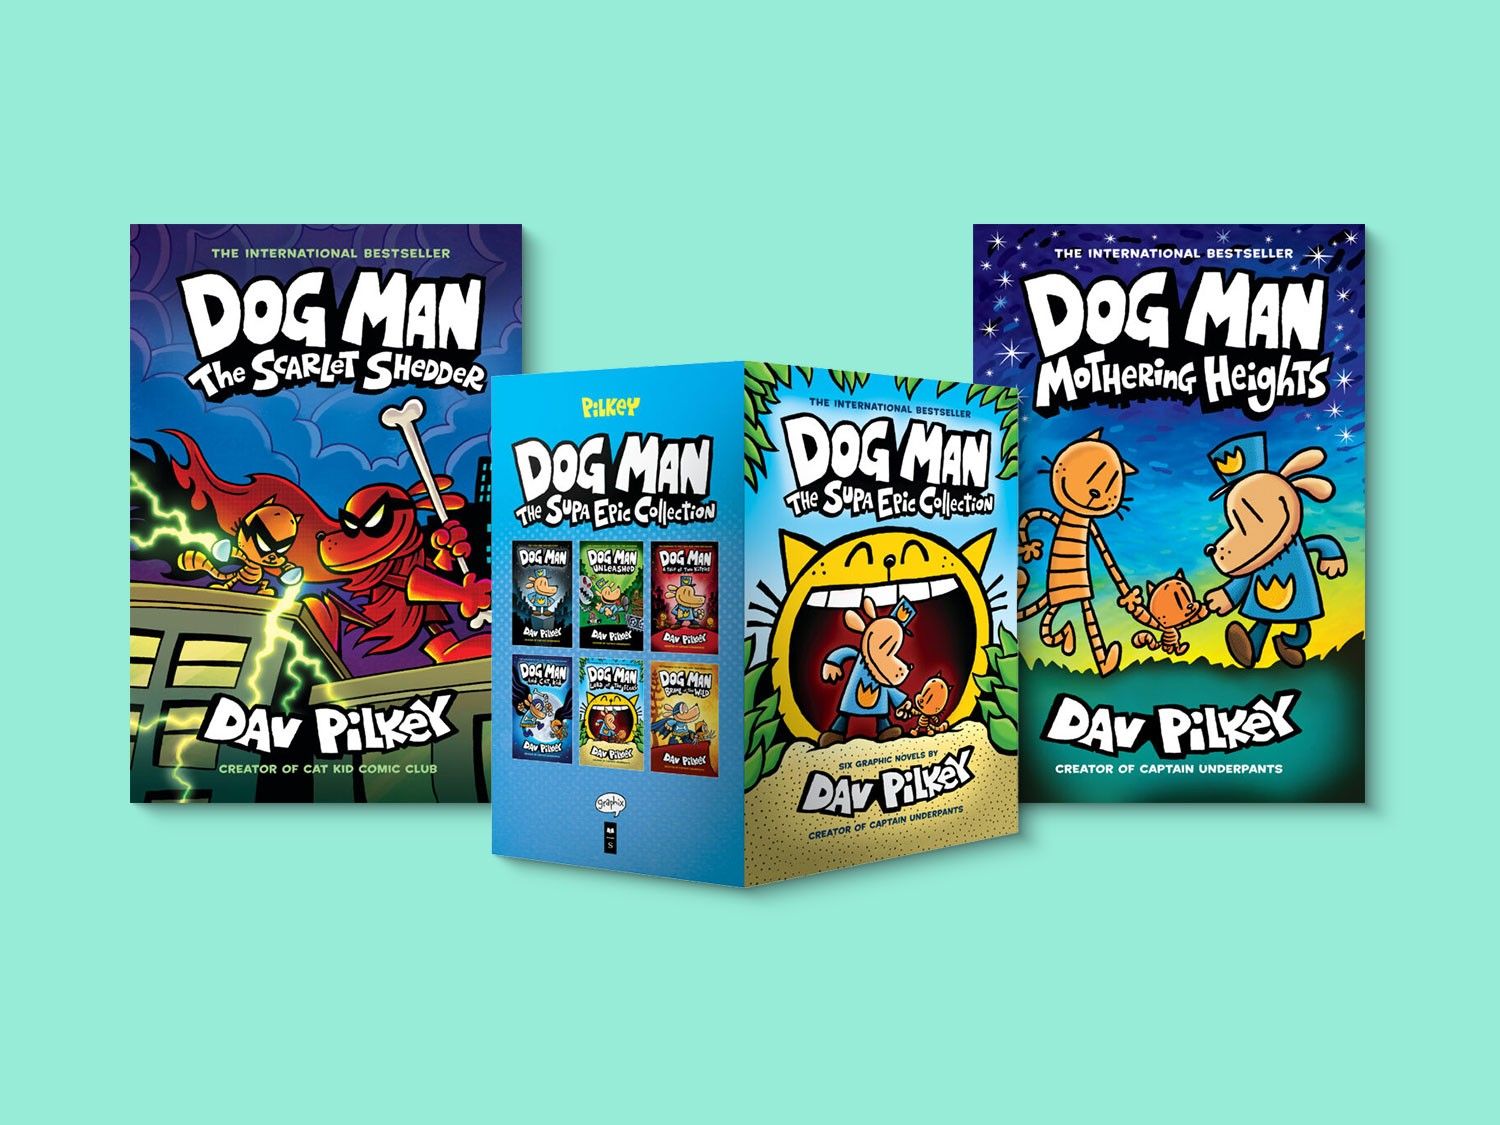 Books in the Dog Man series